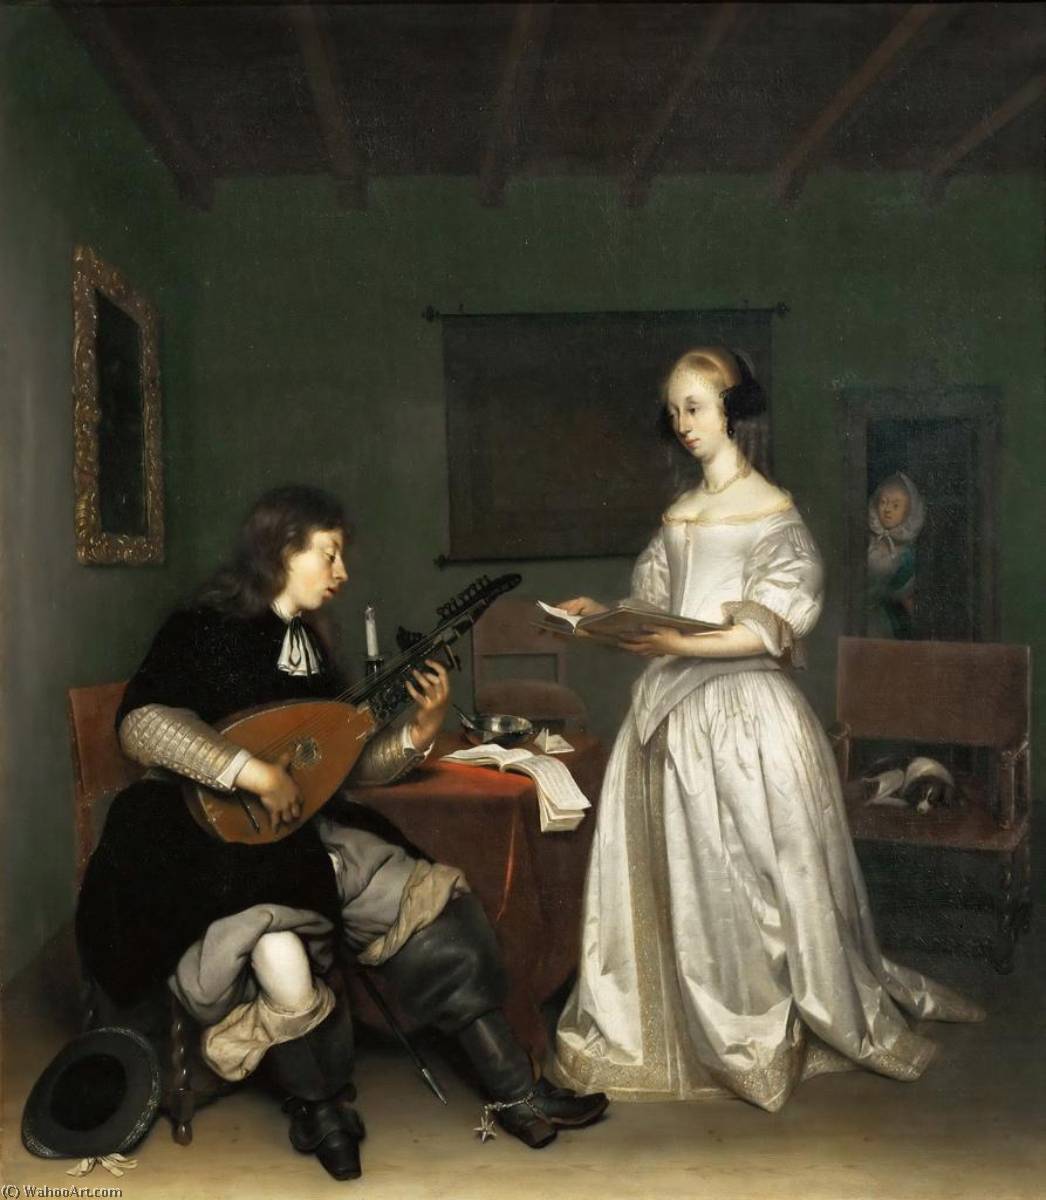 WikiOO.org - 百科事典 - 絵画、アートワーク Gerard Ter Borch The Younger - デュオ 歌手  と  テオルボ  プレーヤー